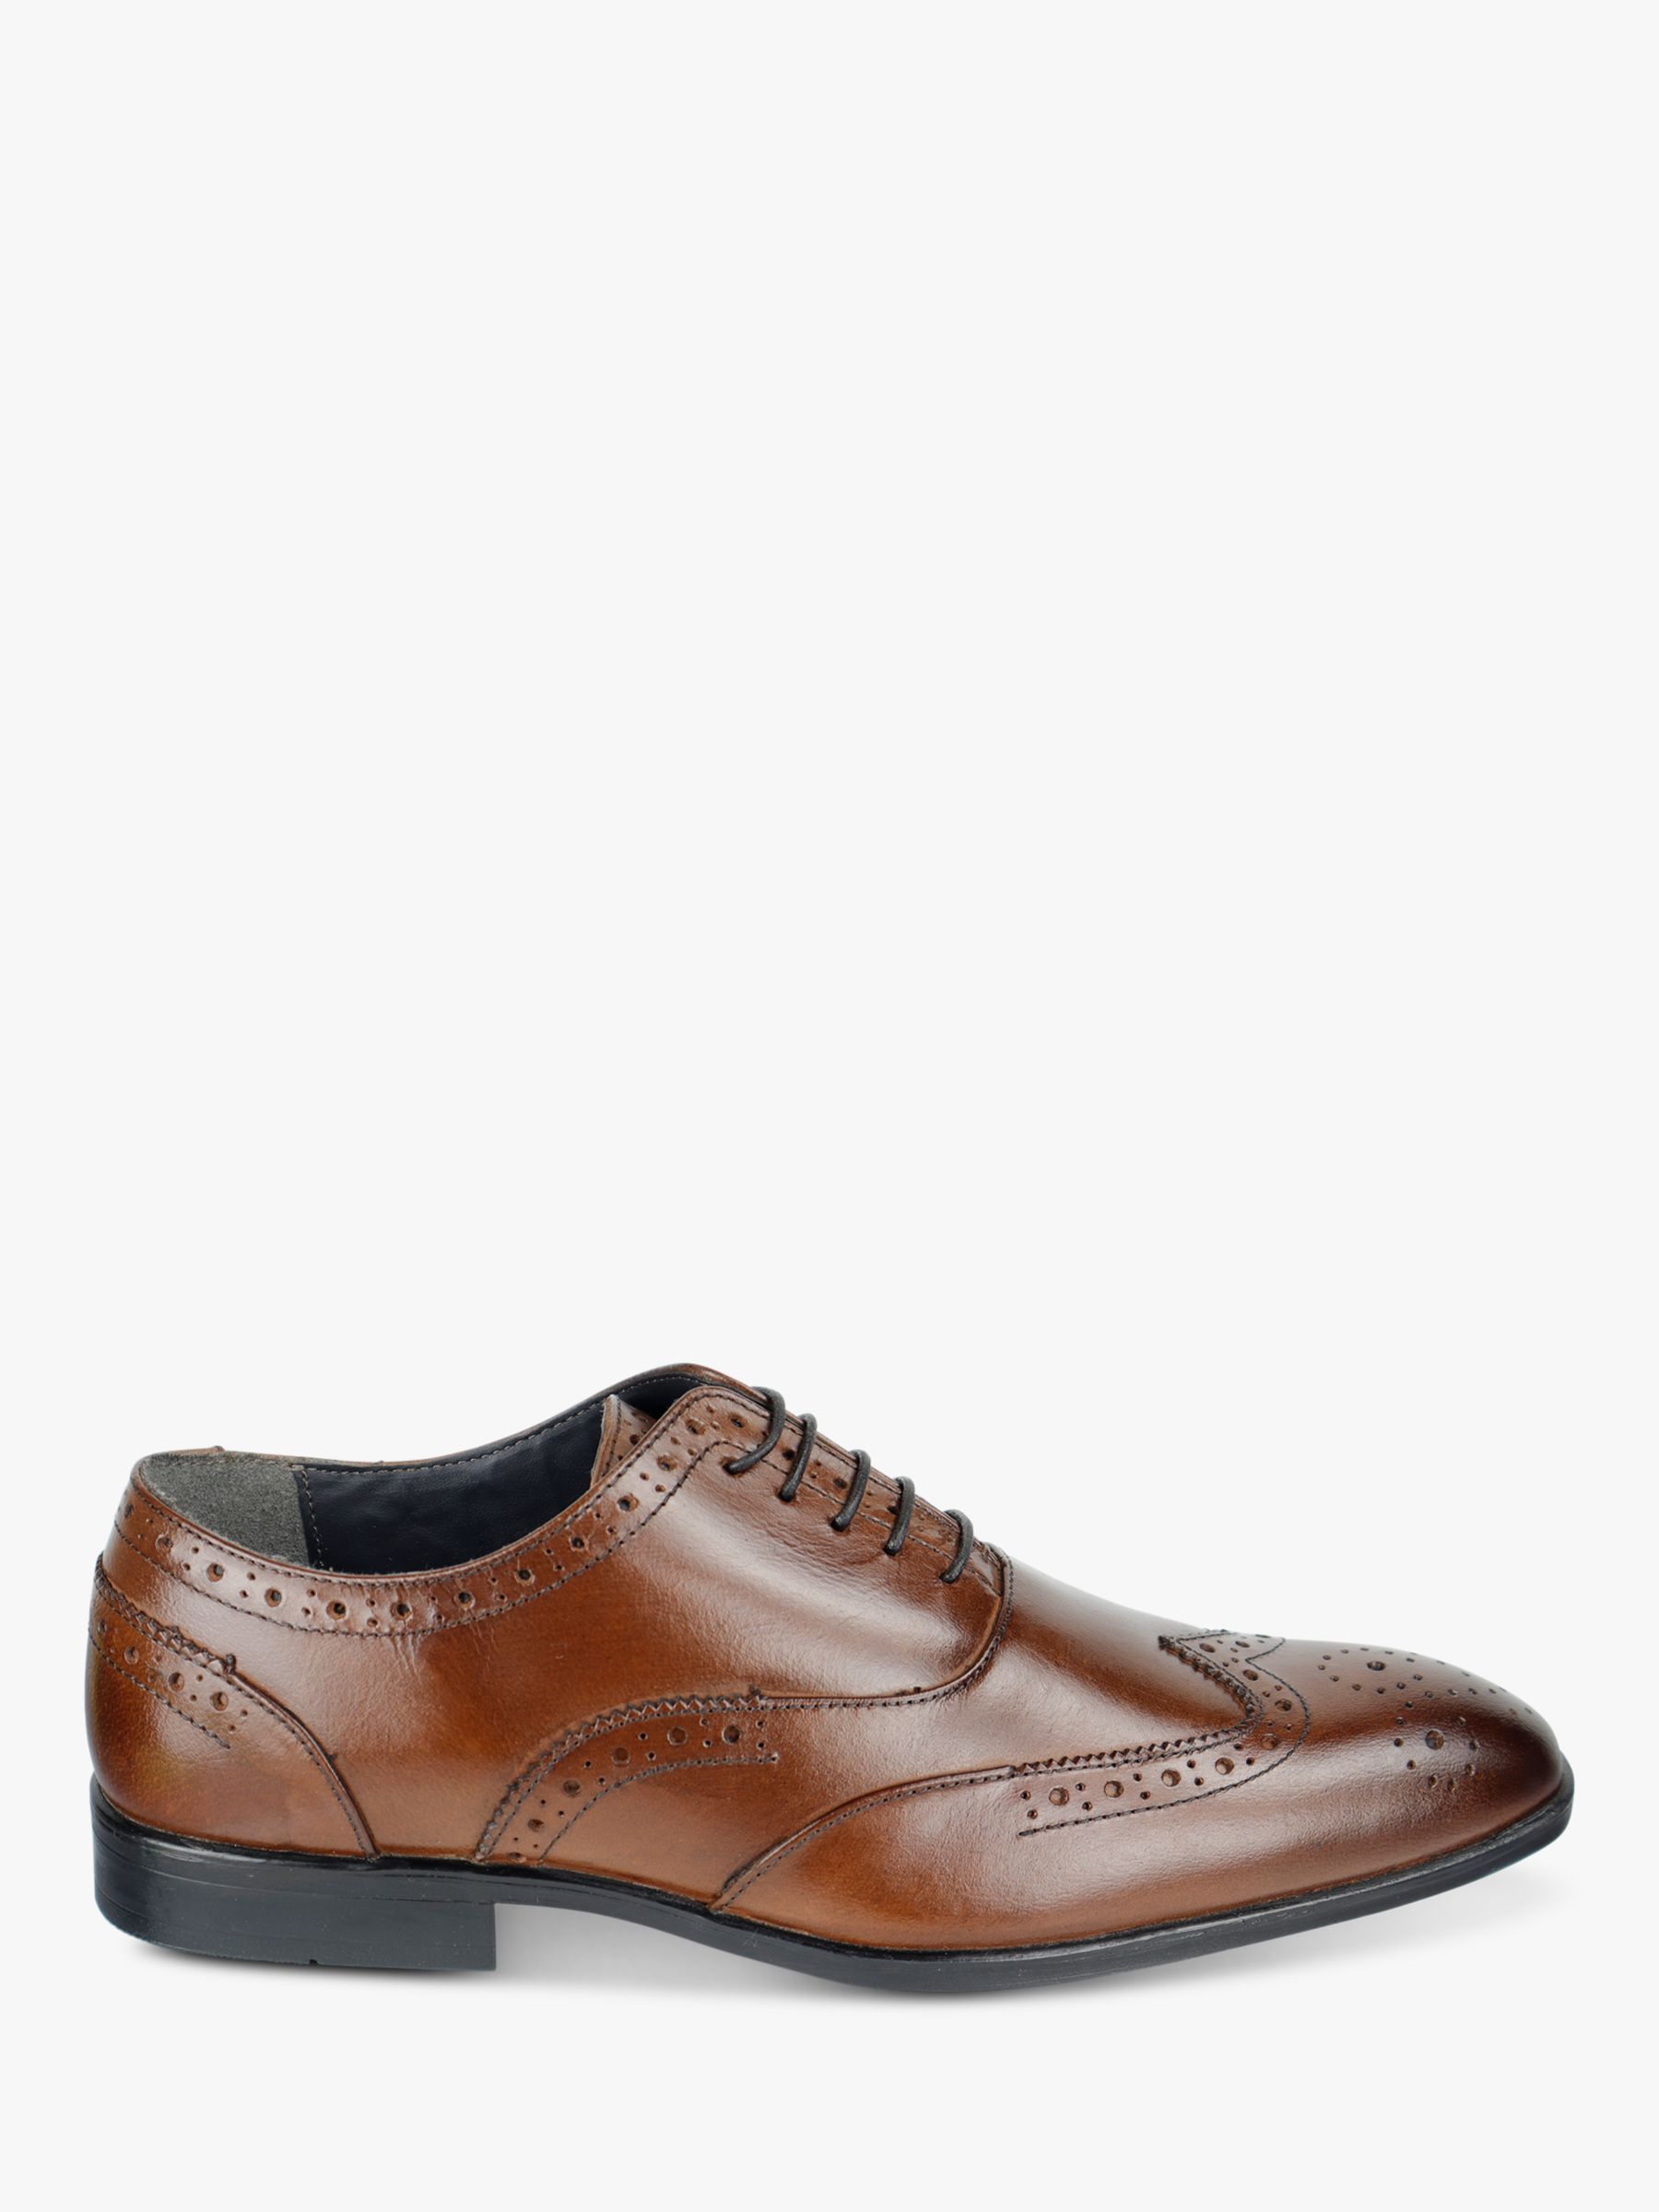 Silver Street London Leather Oxford Brogue Shoes, Brown at John Lewis ...